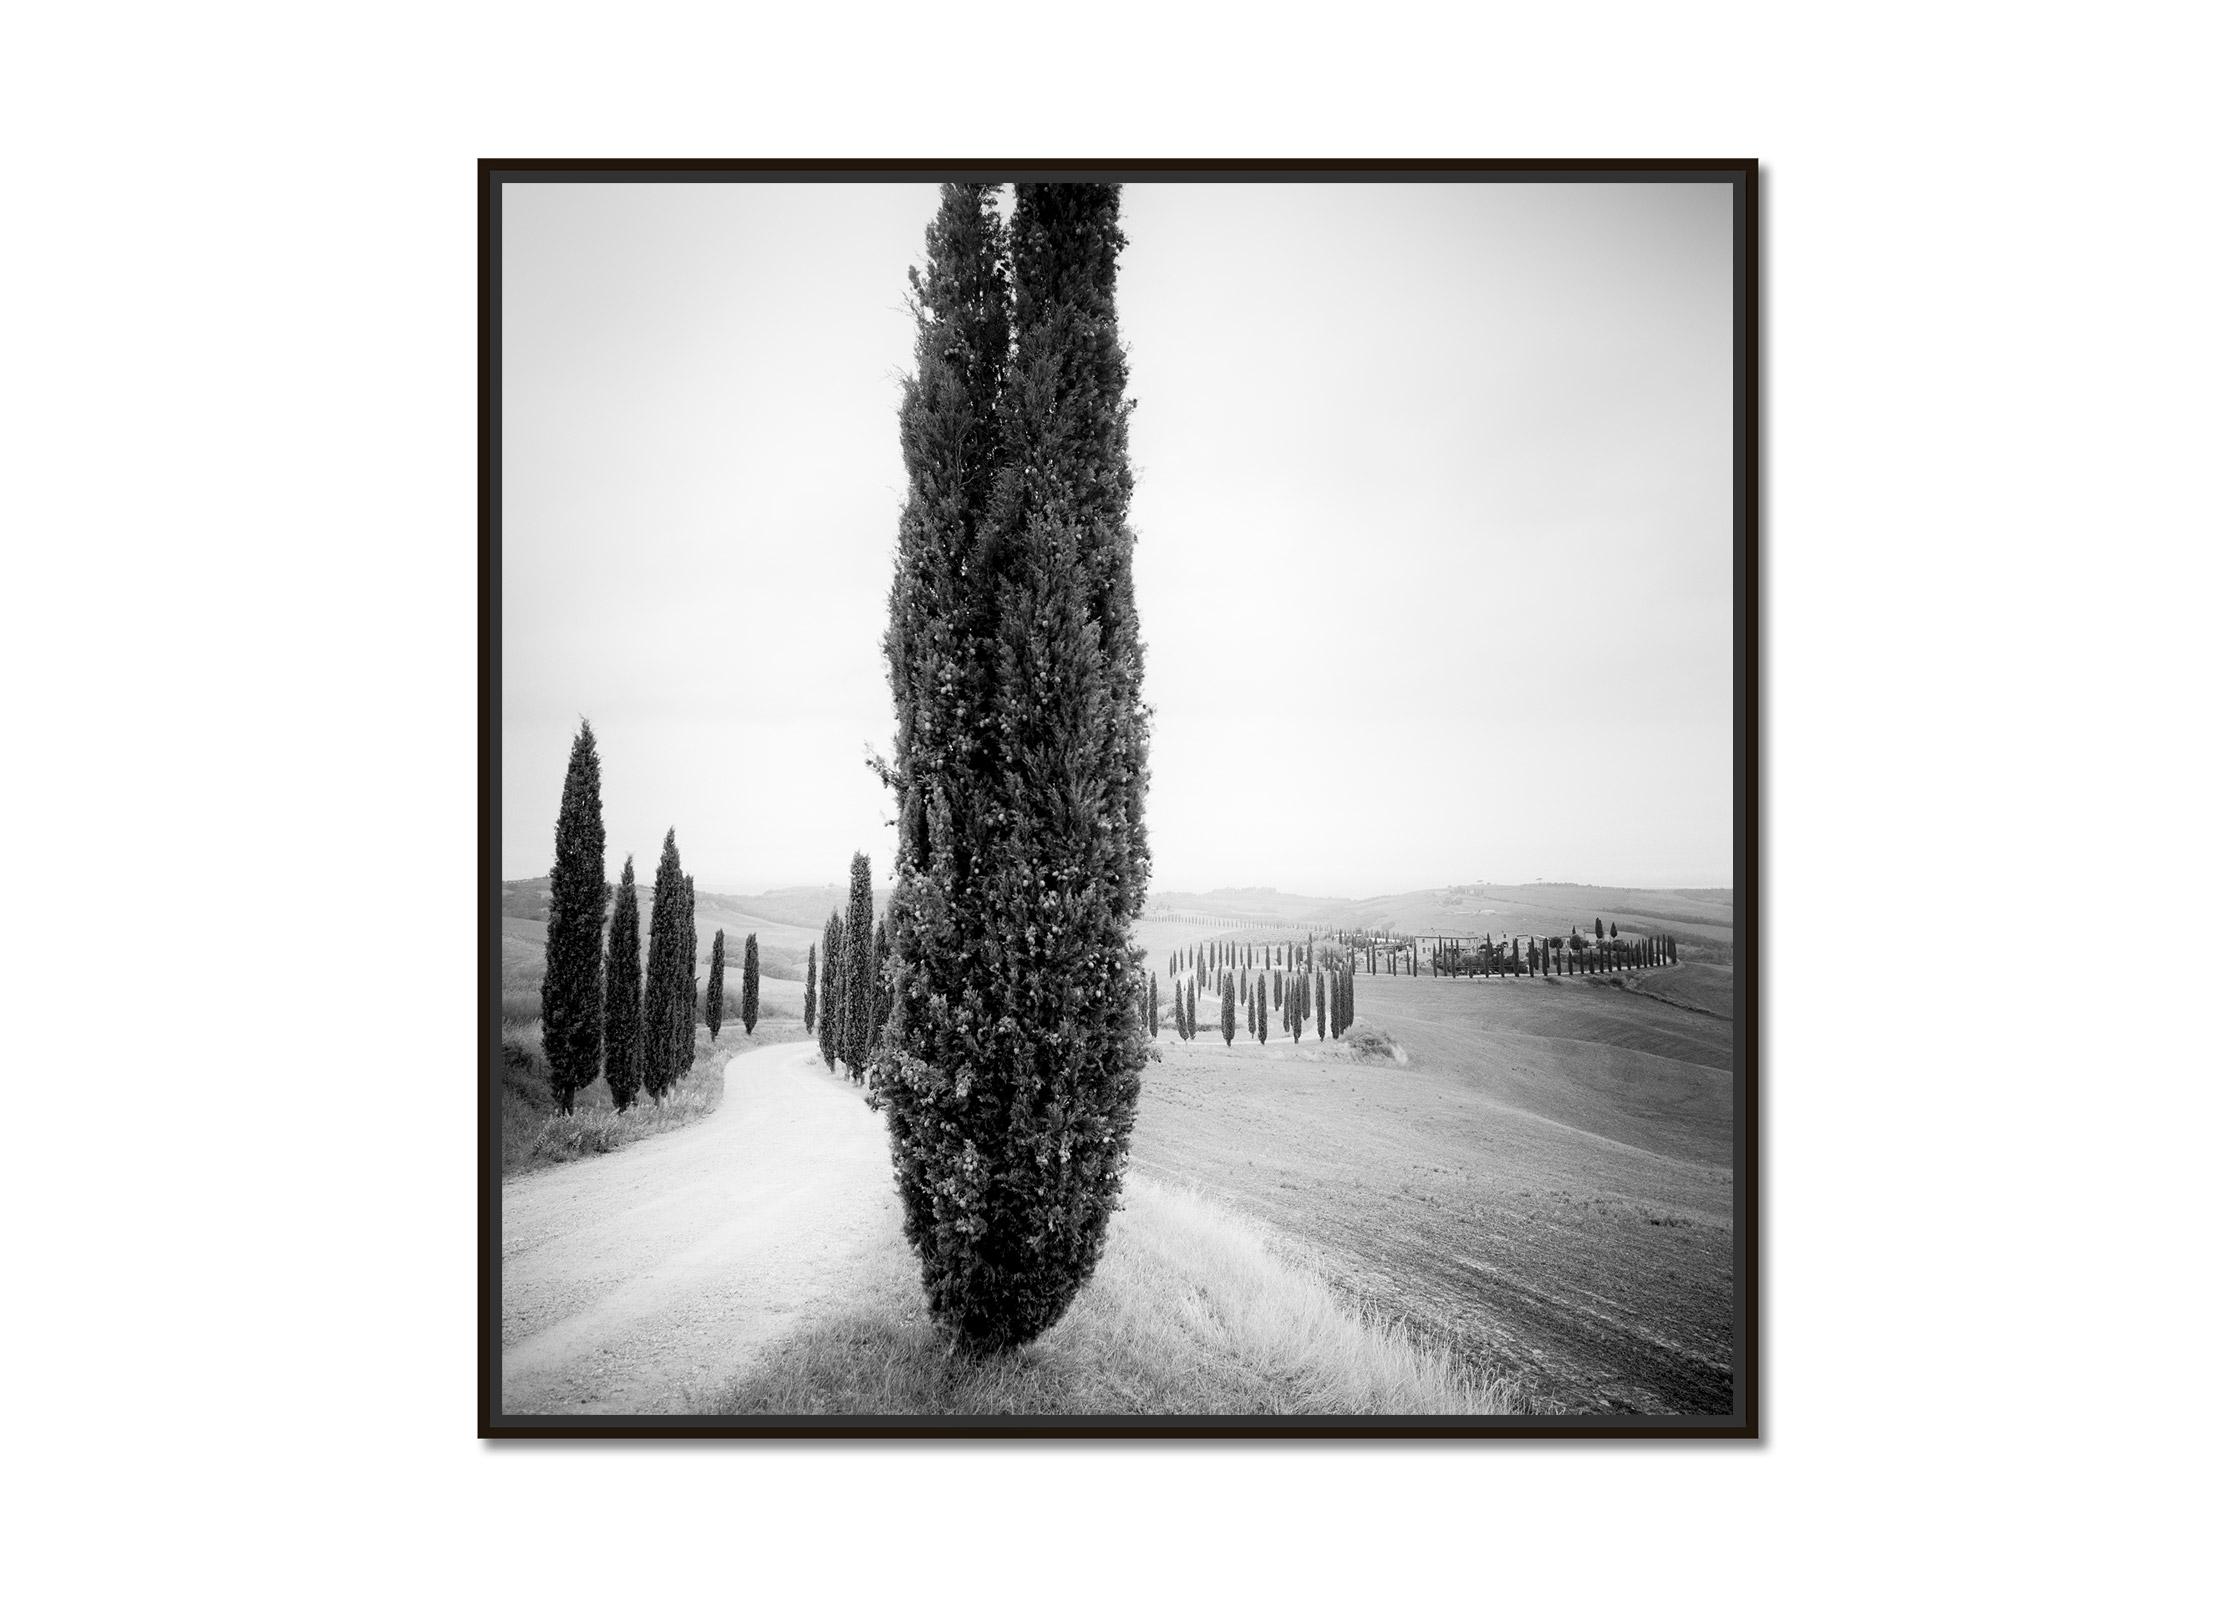 Cypress Trees, Tree Avenue, Tuscany, black and white art landscape photography - Photograph by Gerald Berghammer